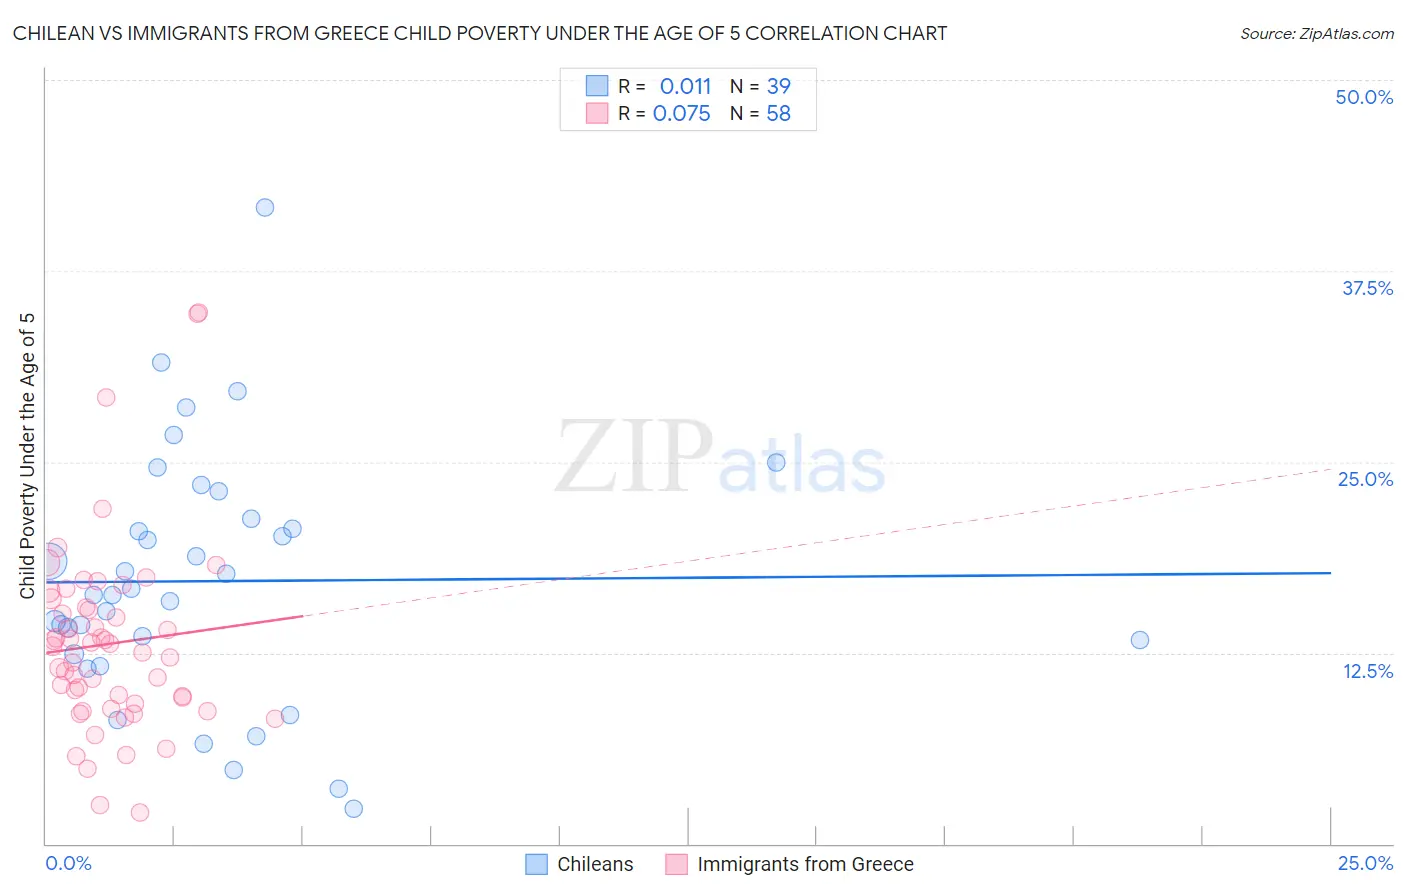 Chilean vs Immigrants from Greece Child Poverty Under the Age of 5